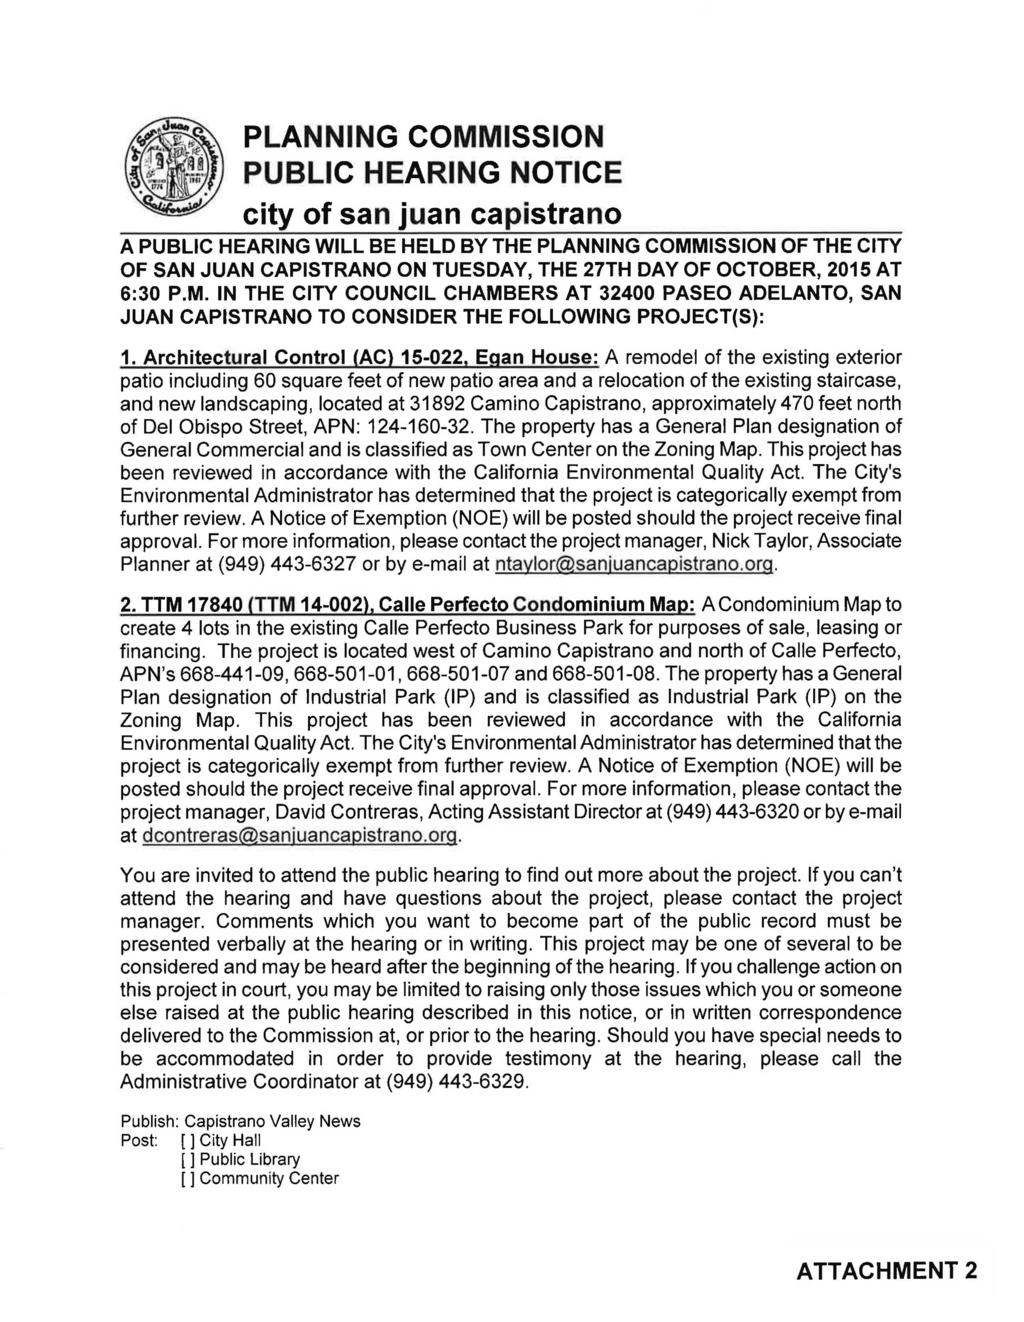 PLANNING COMMISSION PUBLIC HEARING NOTICE city of san juan capistrano A PUBLIC HEARING WILL BE HELD BY THE PLANNING COMMISSION OF THE CITY OF SAN JUAN CAPISTRANO ON TUESDAY, THE 27TH DAY OF OCTOBER,